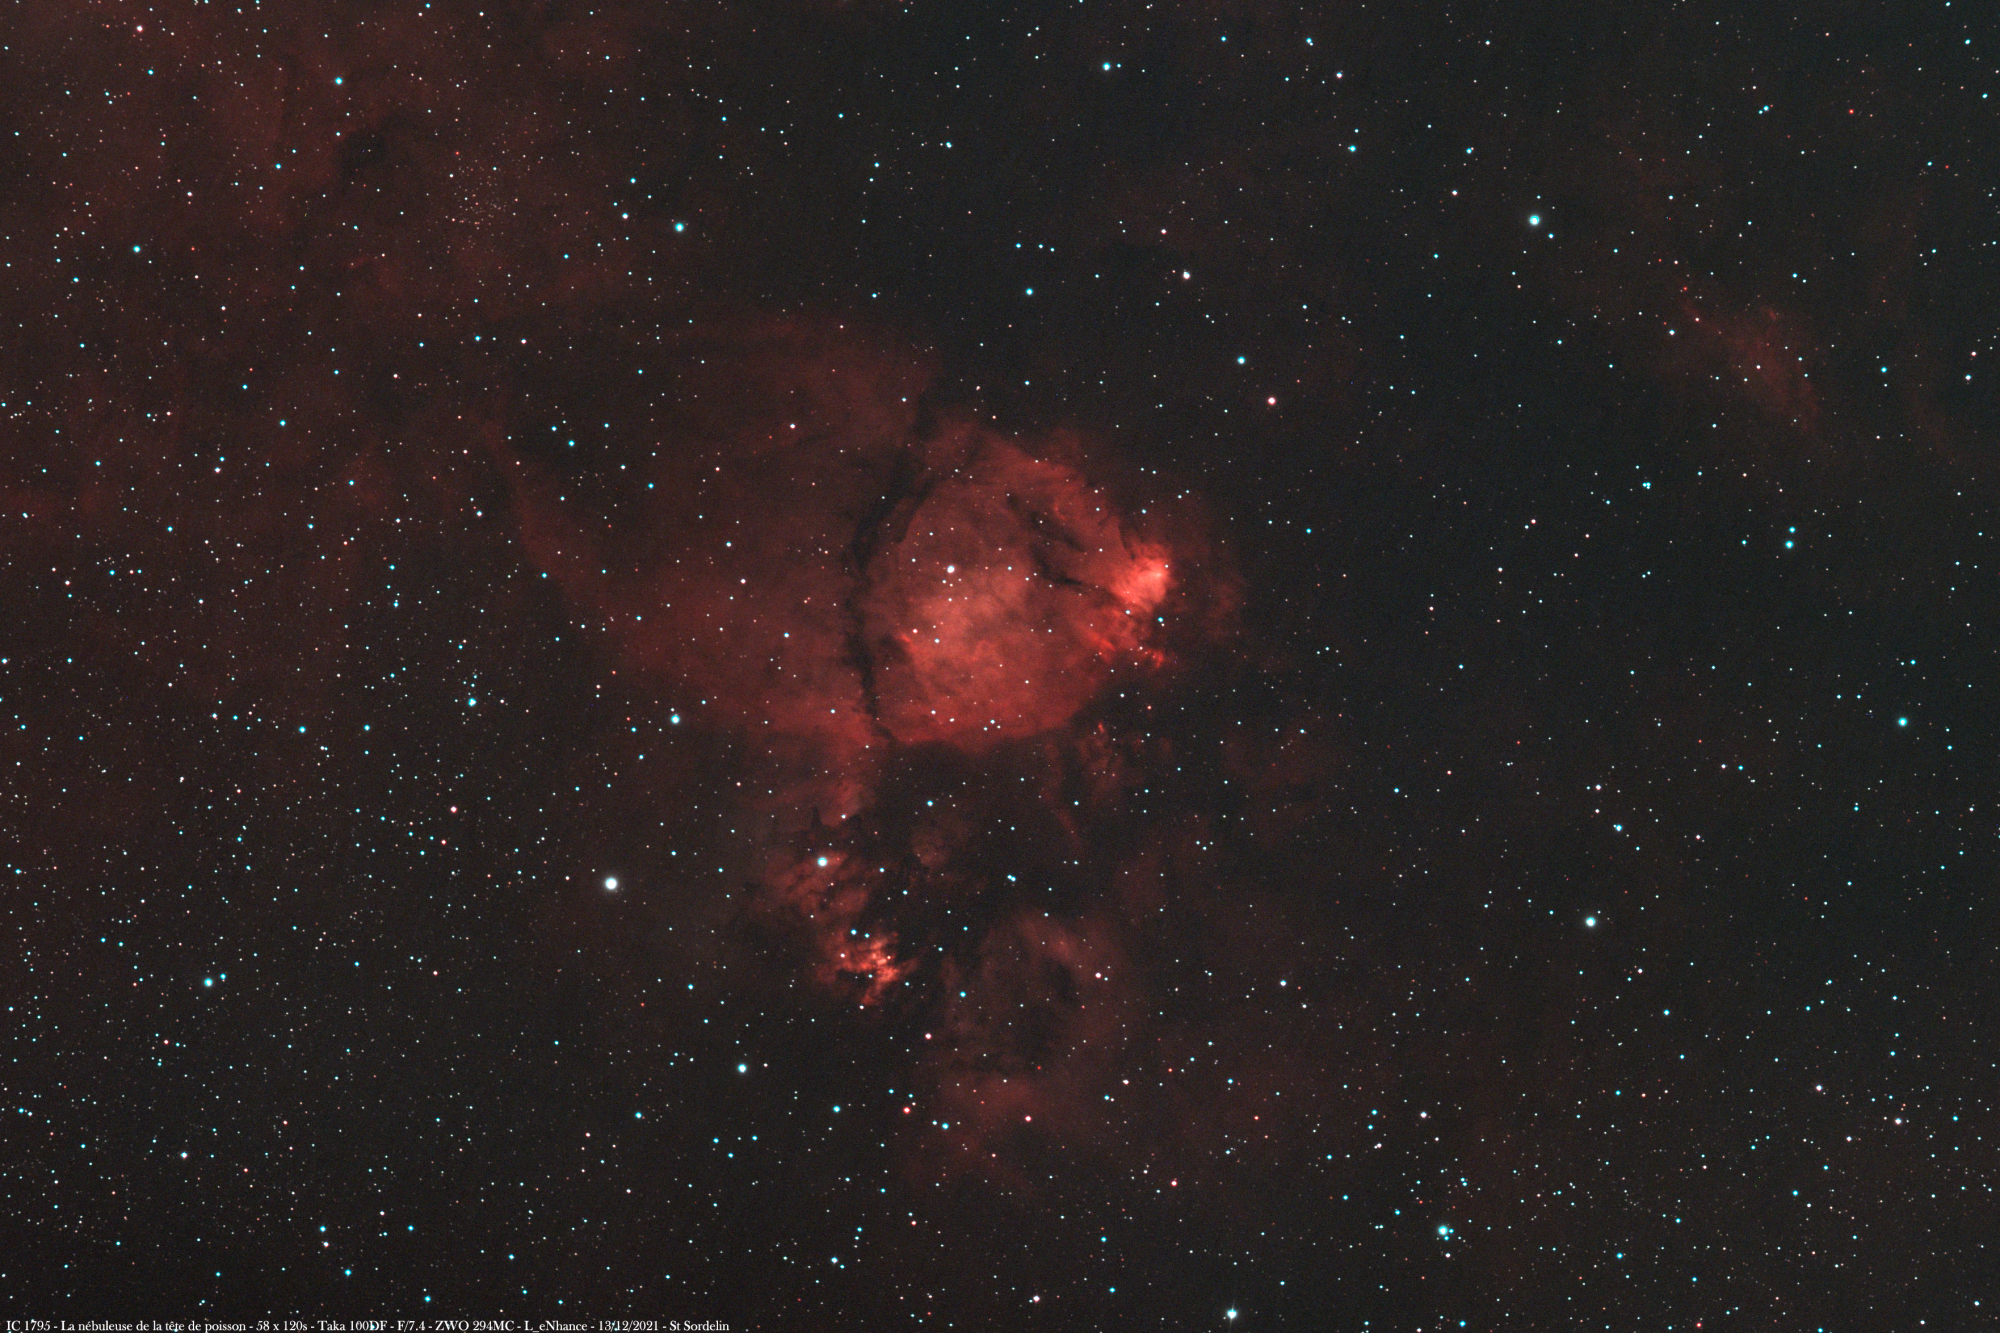 ic1795_final.png